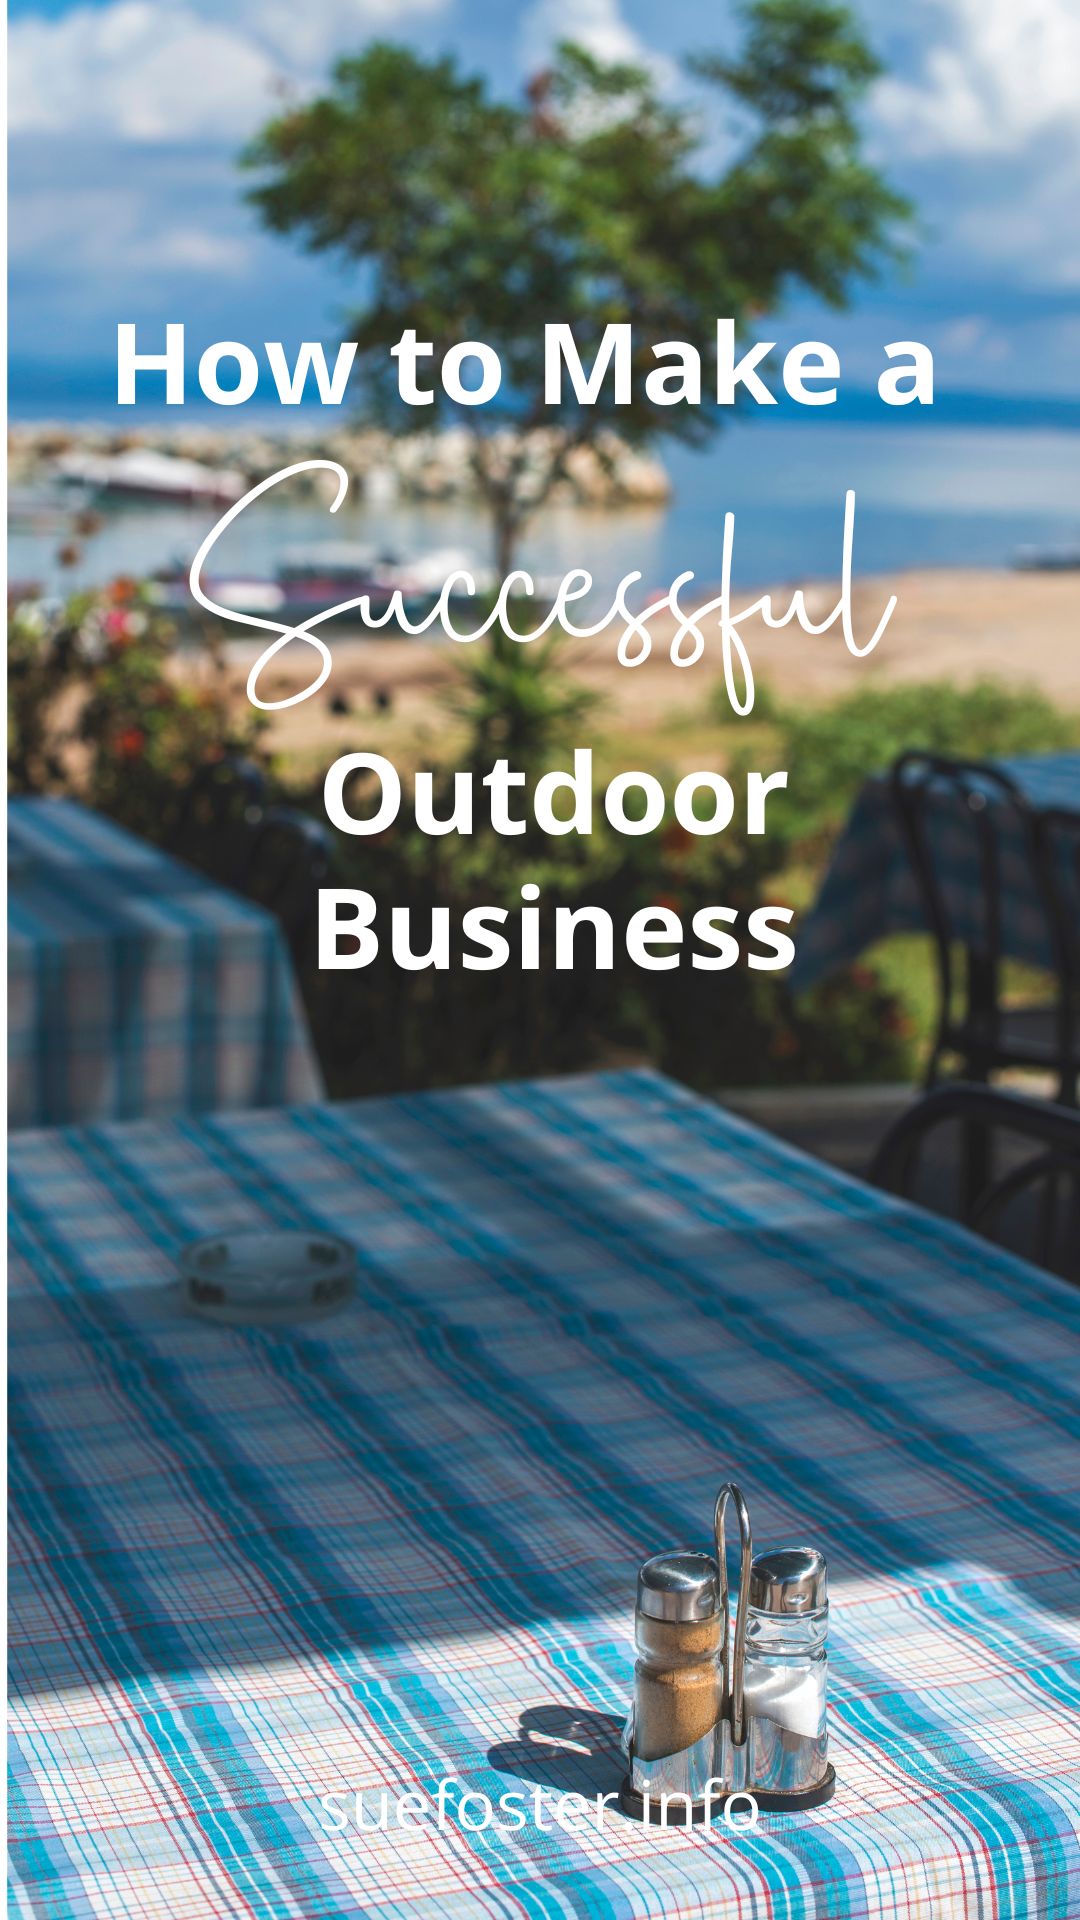 Because of the pandemic, outdoor businesses are more popular. Here are some tips to build a successful one.